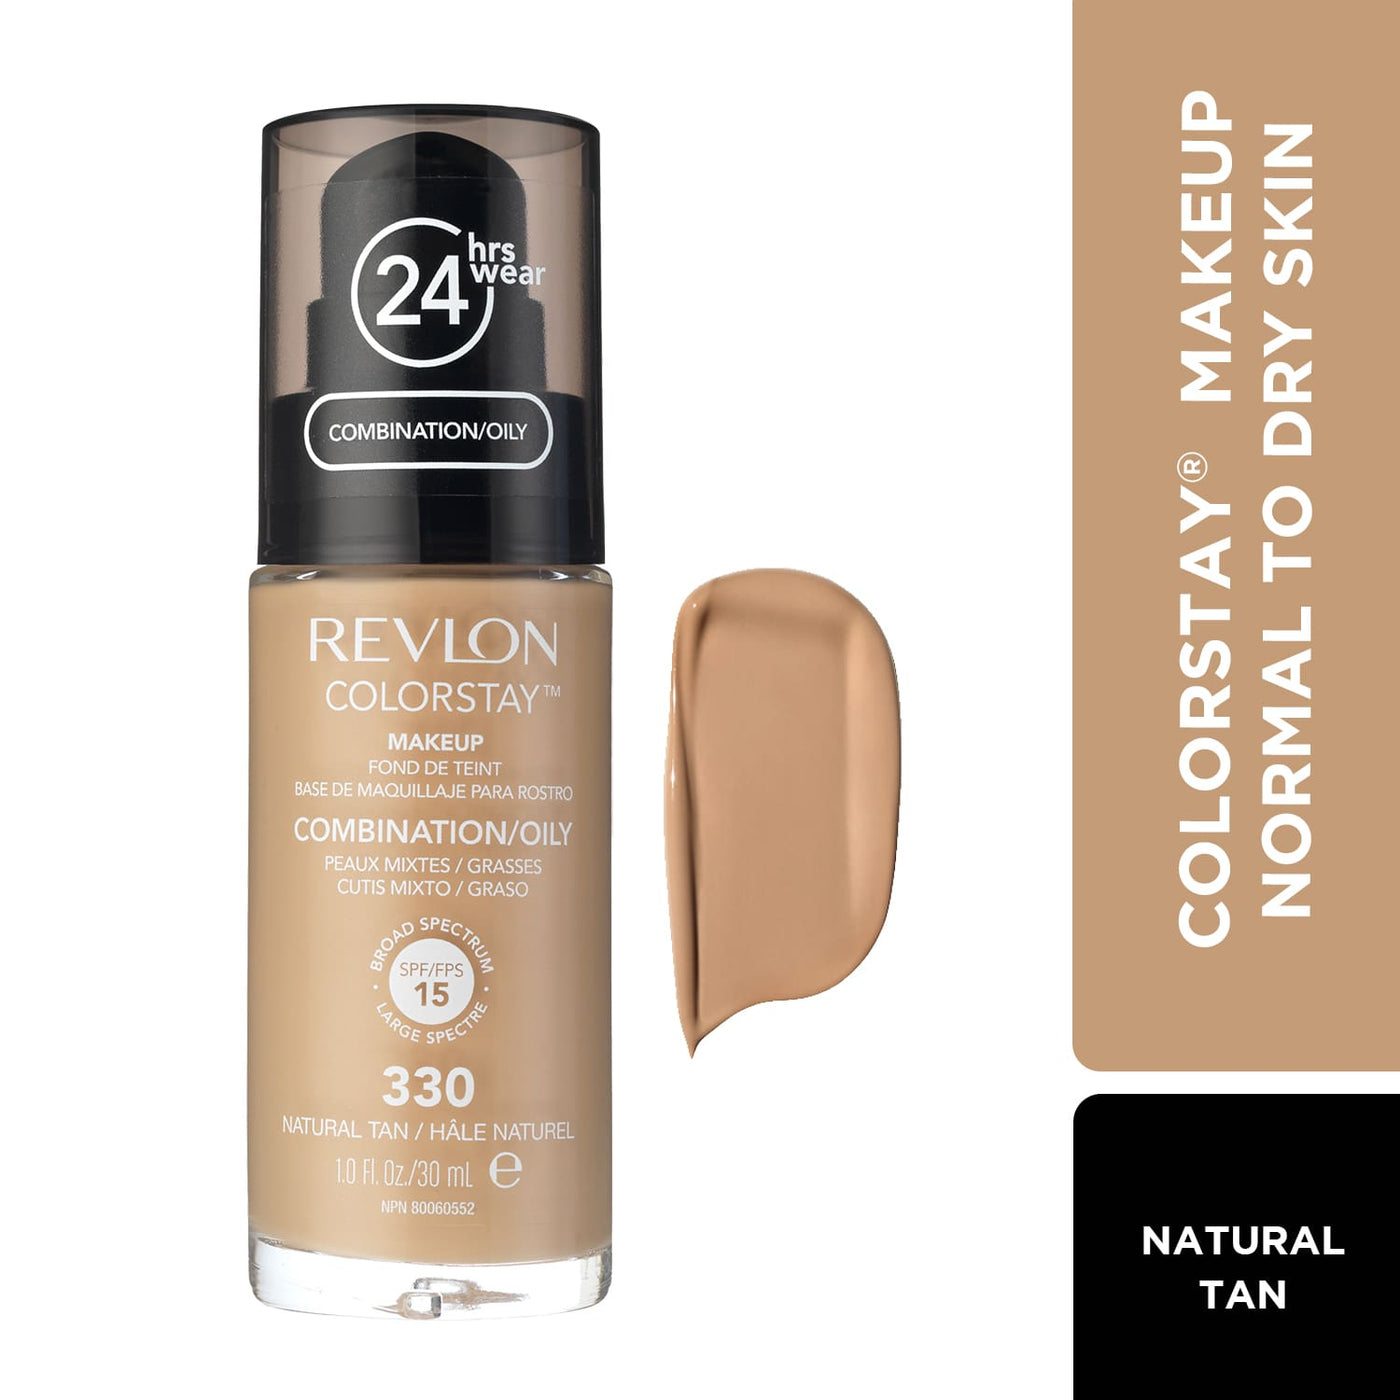 Revlon ColorStay Makeup for Oily to Combination Skin SPF 15